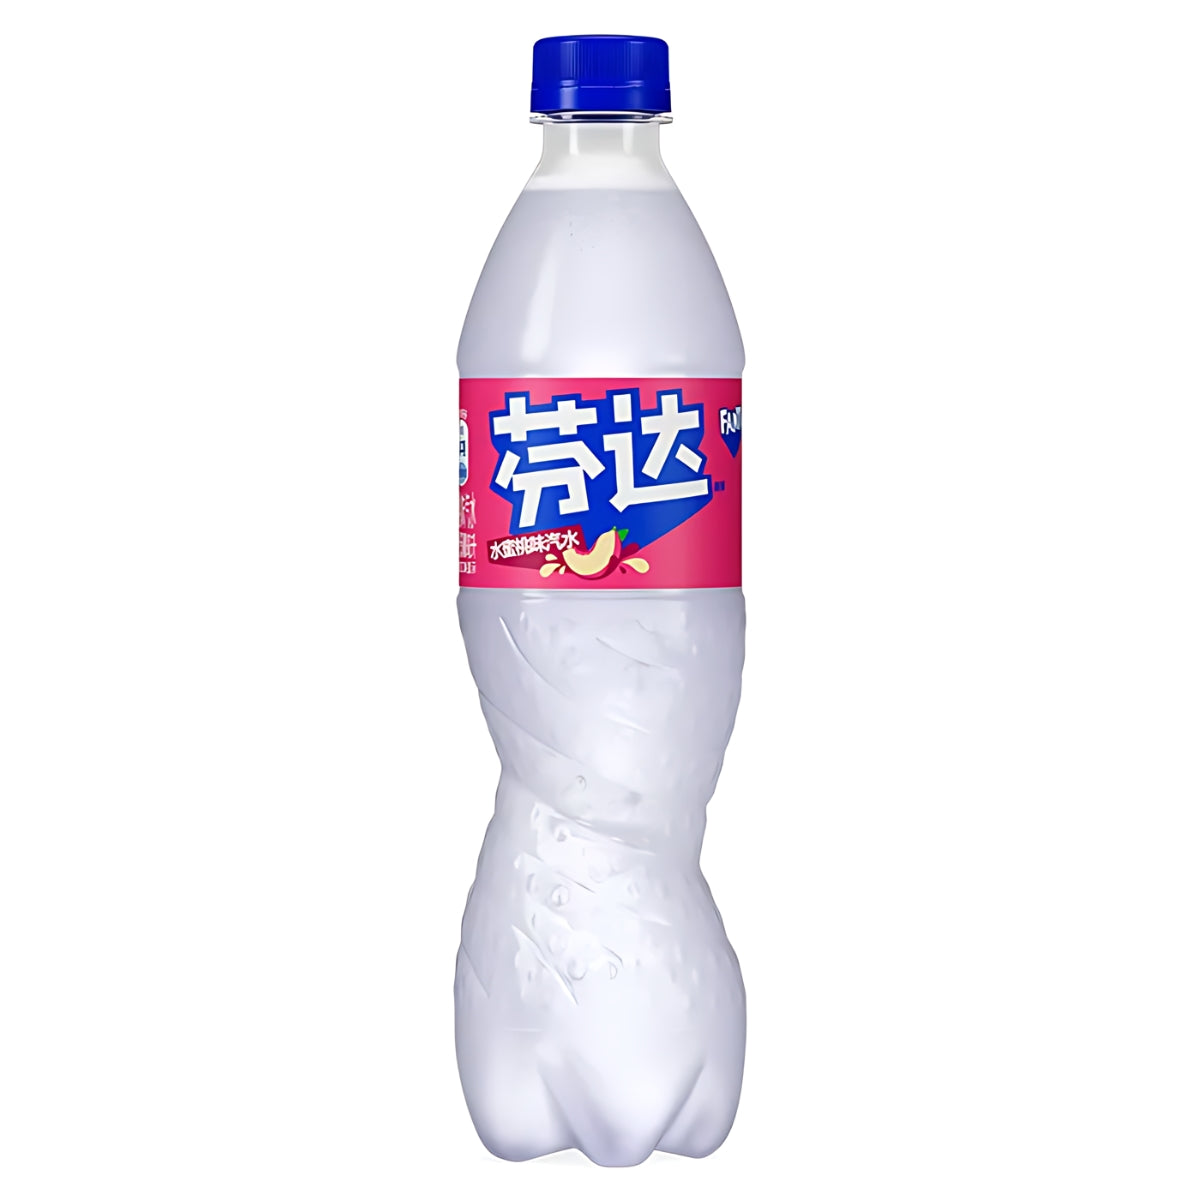 A clear plastic bottle with a blue cap and a pink label, containing a white liquid reminiscent of the fruity flavor of Fanta - White Peach Bottle (China) - 500ml.